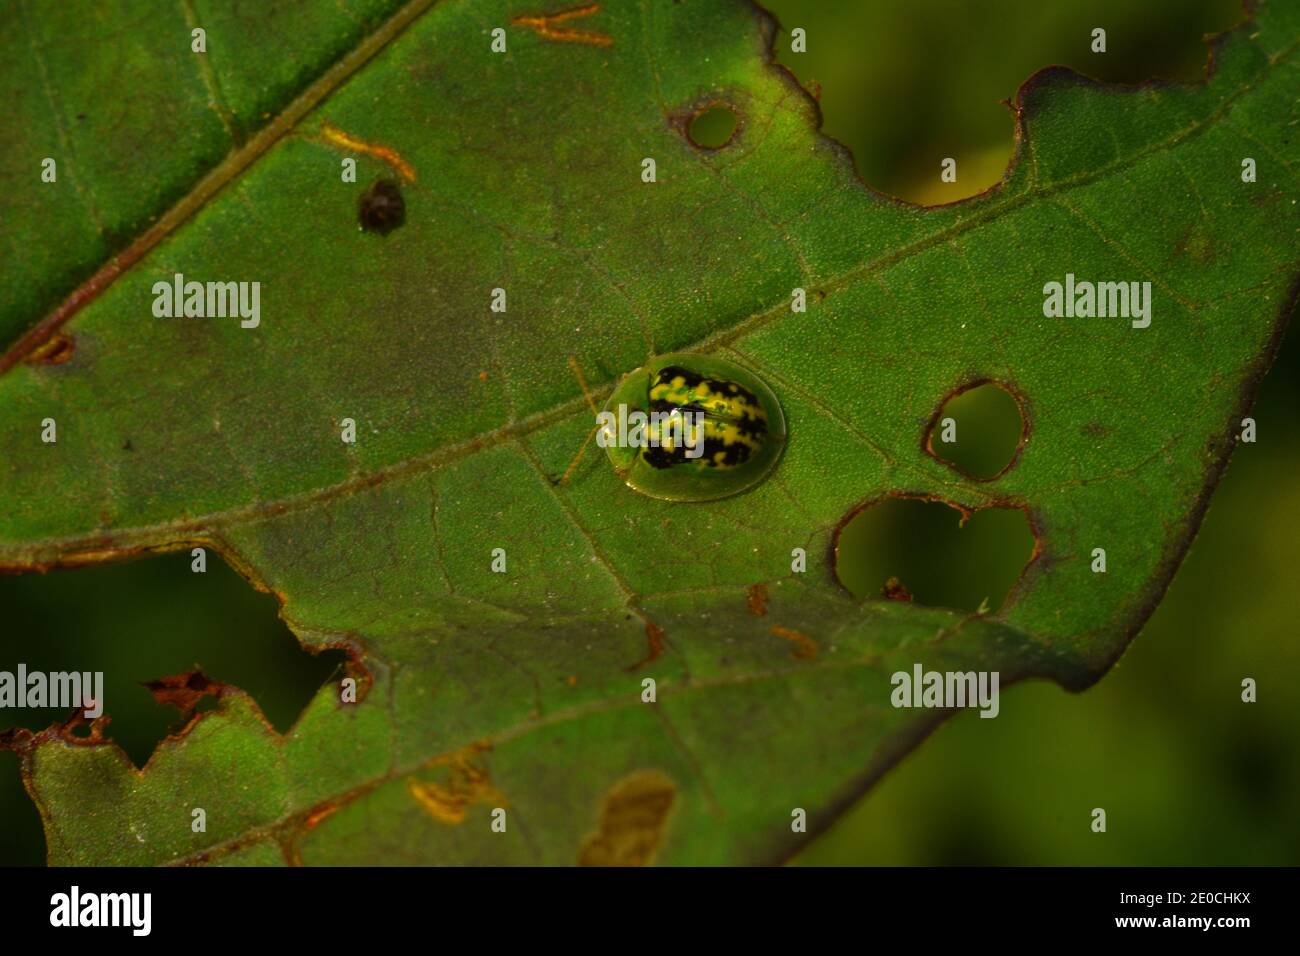 A black spotted green tortoise beetle rest on a leaf Stock Photo